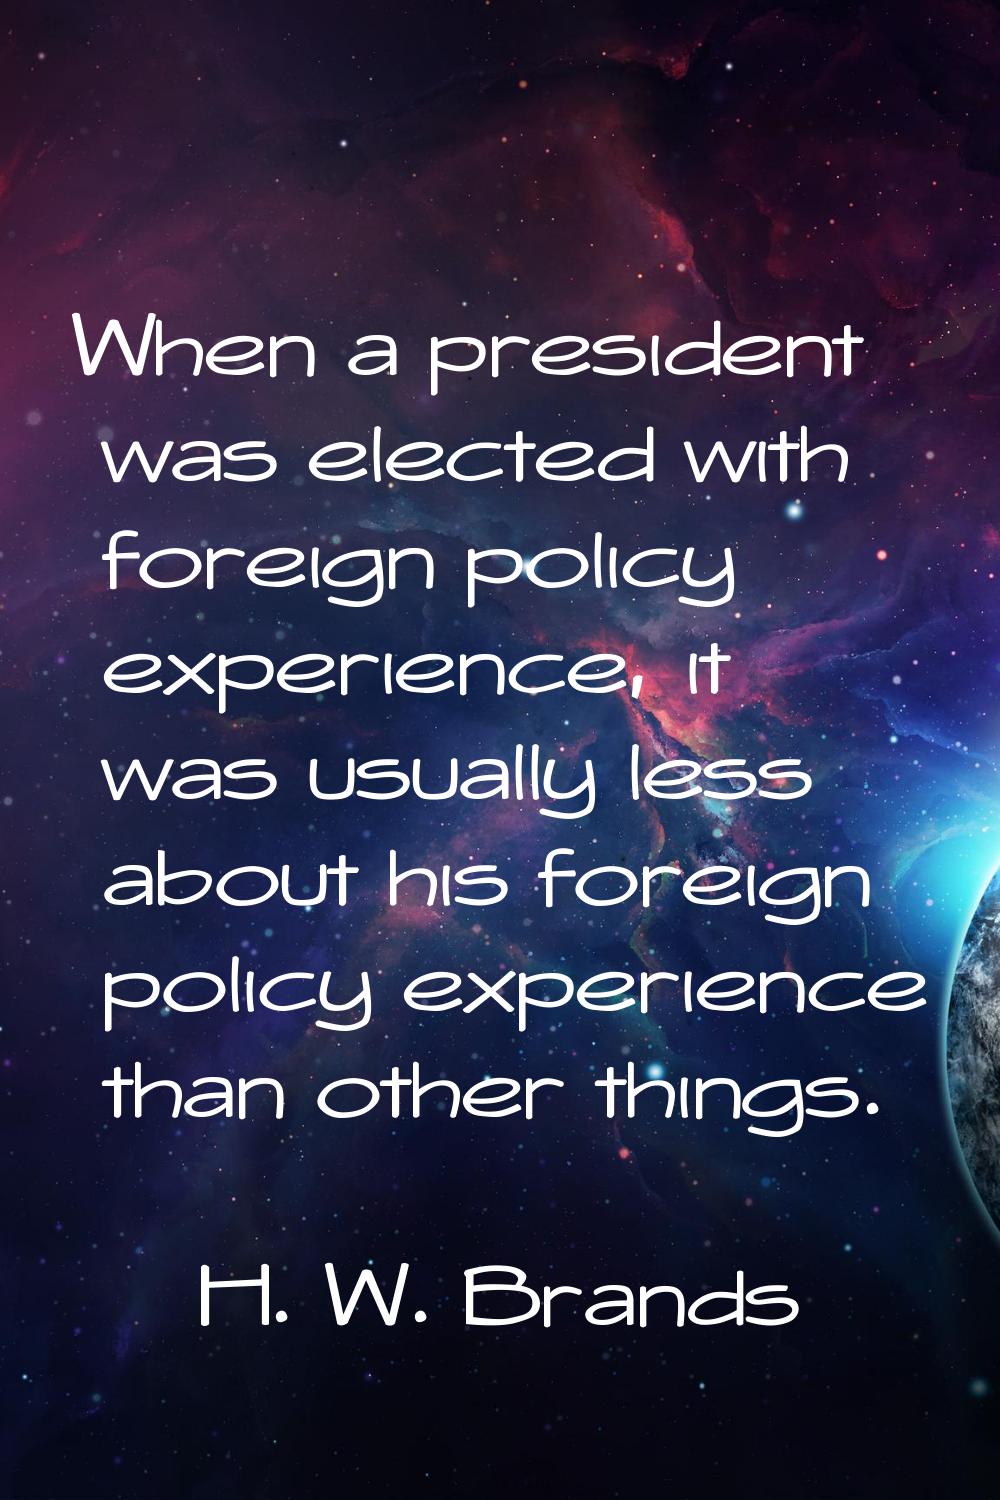 When a president was elected with foreign policy experience, it was usually less about his foreign 